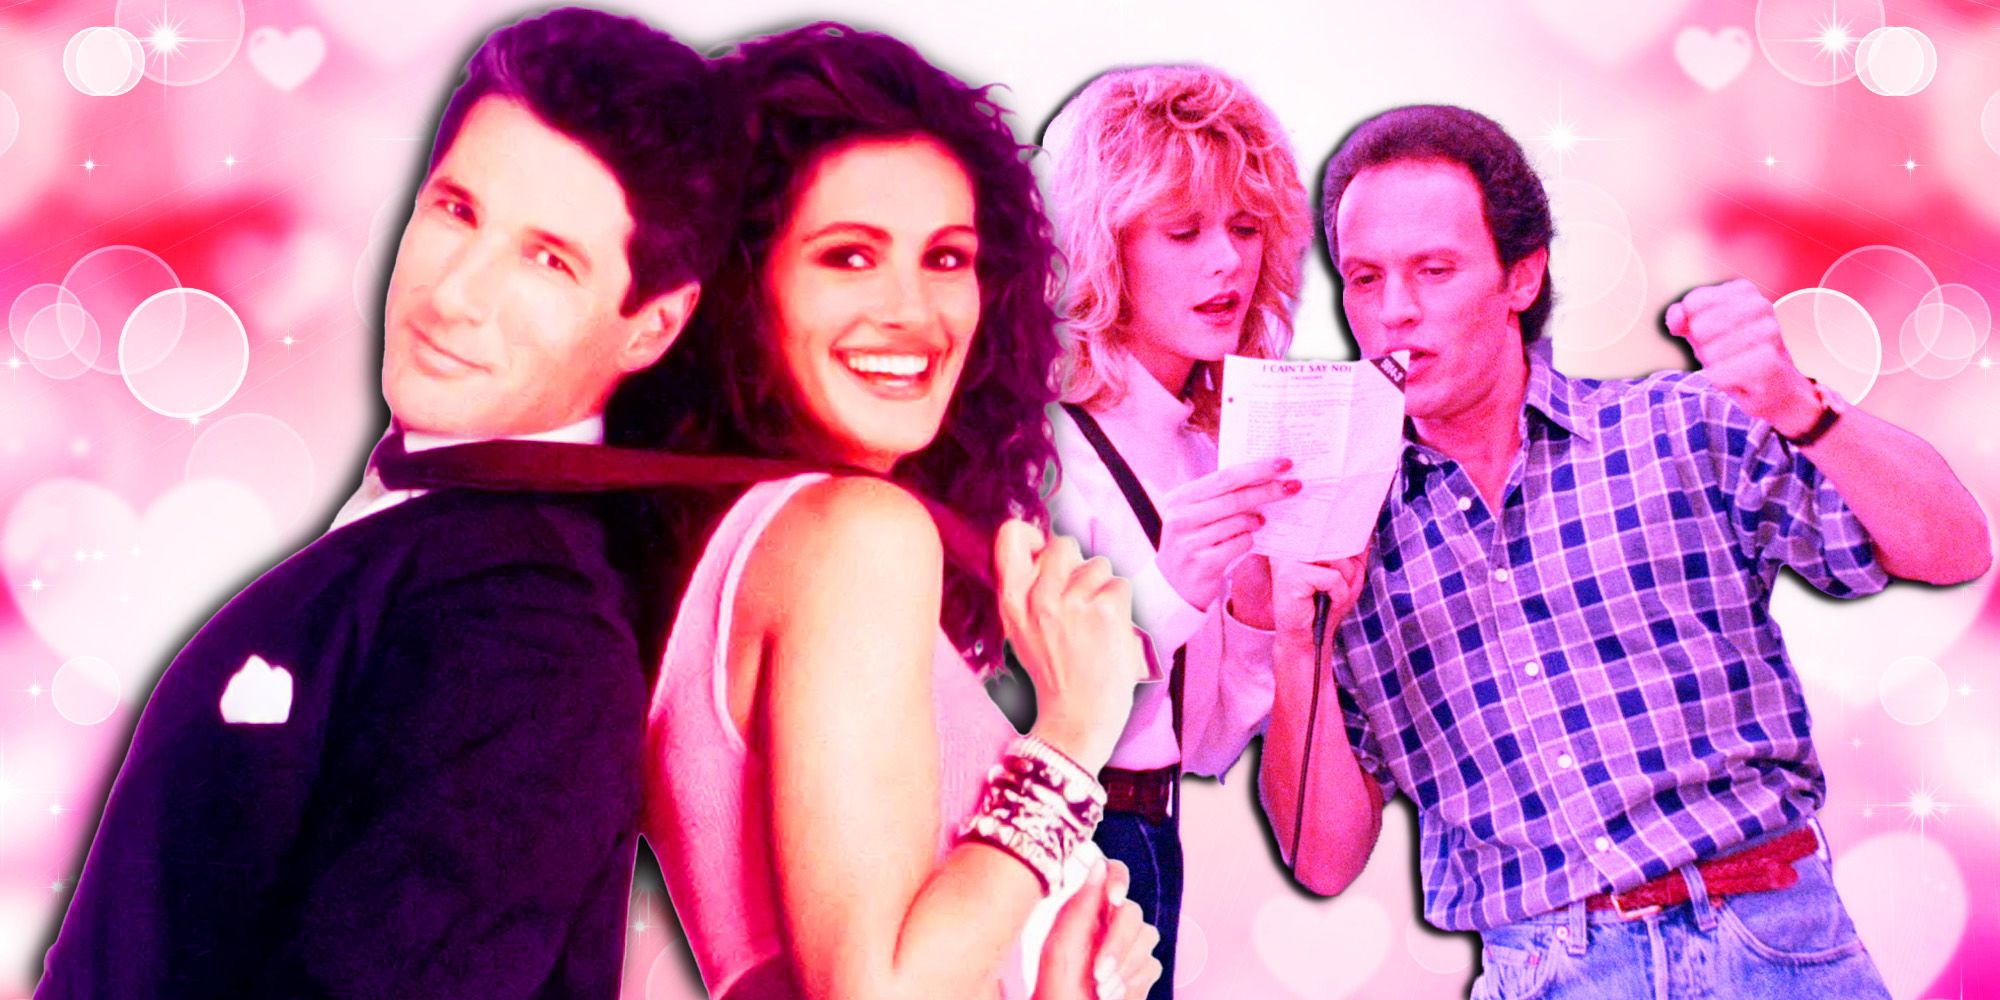 Meg Ryan and Billy Crystal in When Harry Met Sally, And Julia Roberts and Richard Gere in Pretty Woman 